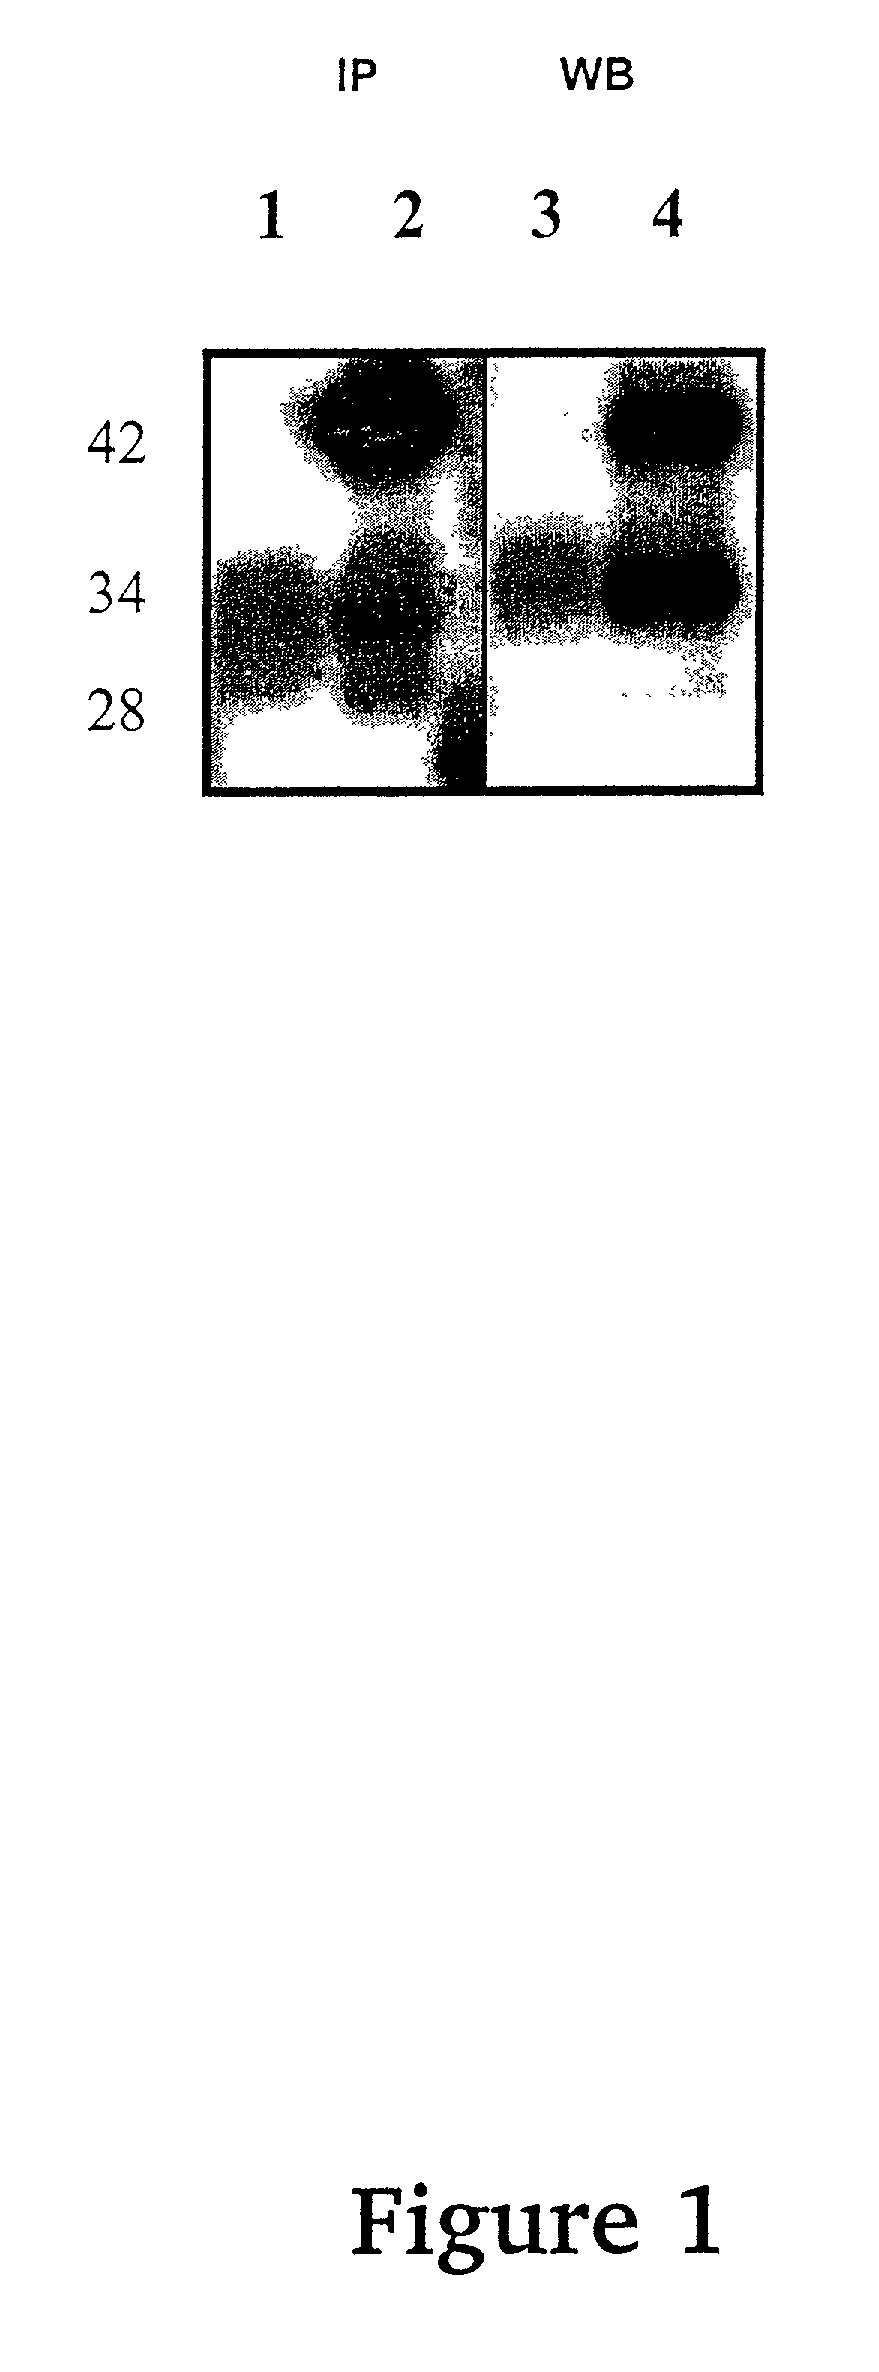 Method for diagnosing a pre-neoplastic or neoplastic lesion in transitional epithelial cells